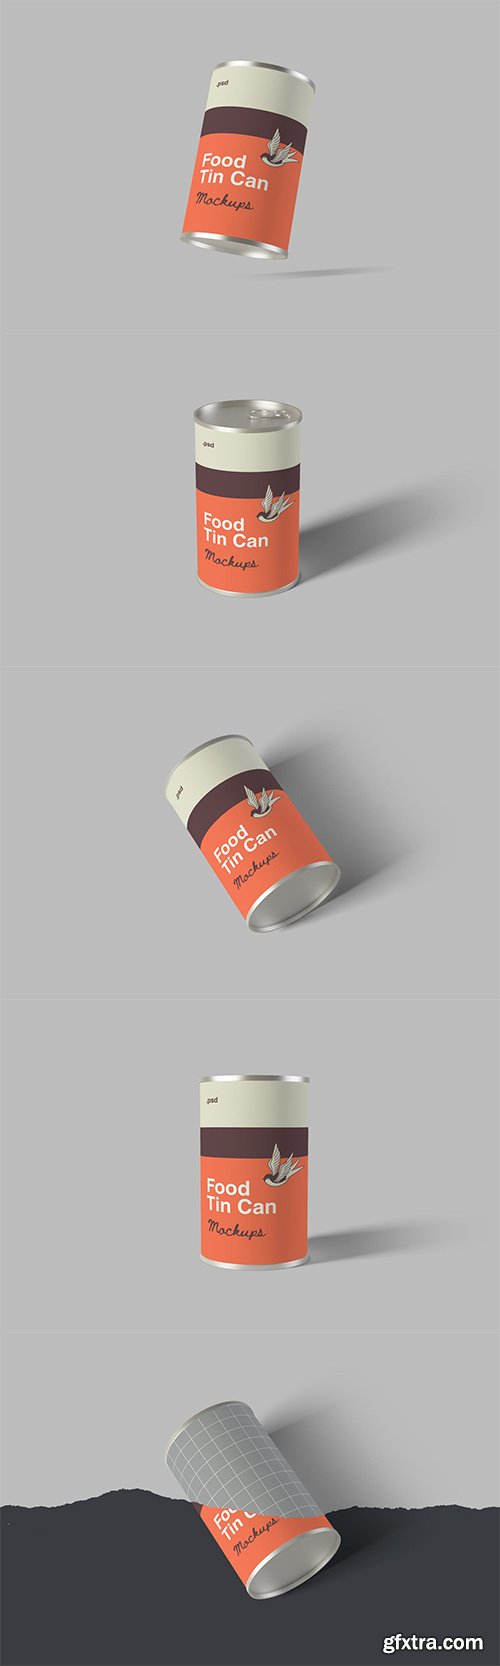 Food Tin Can Packaging Mockups